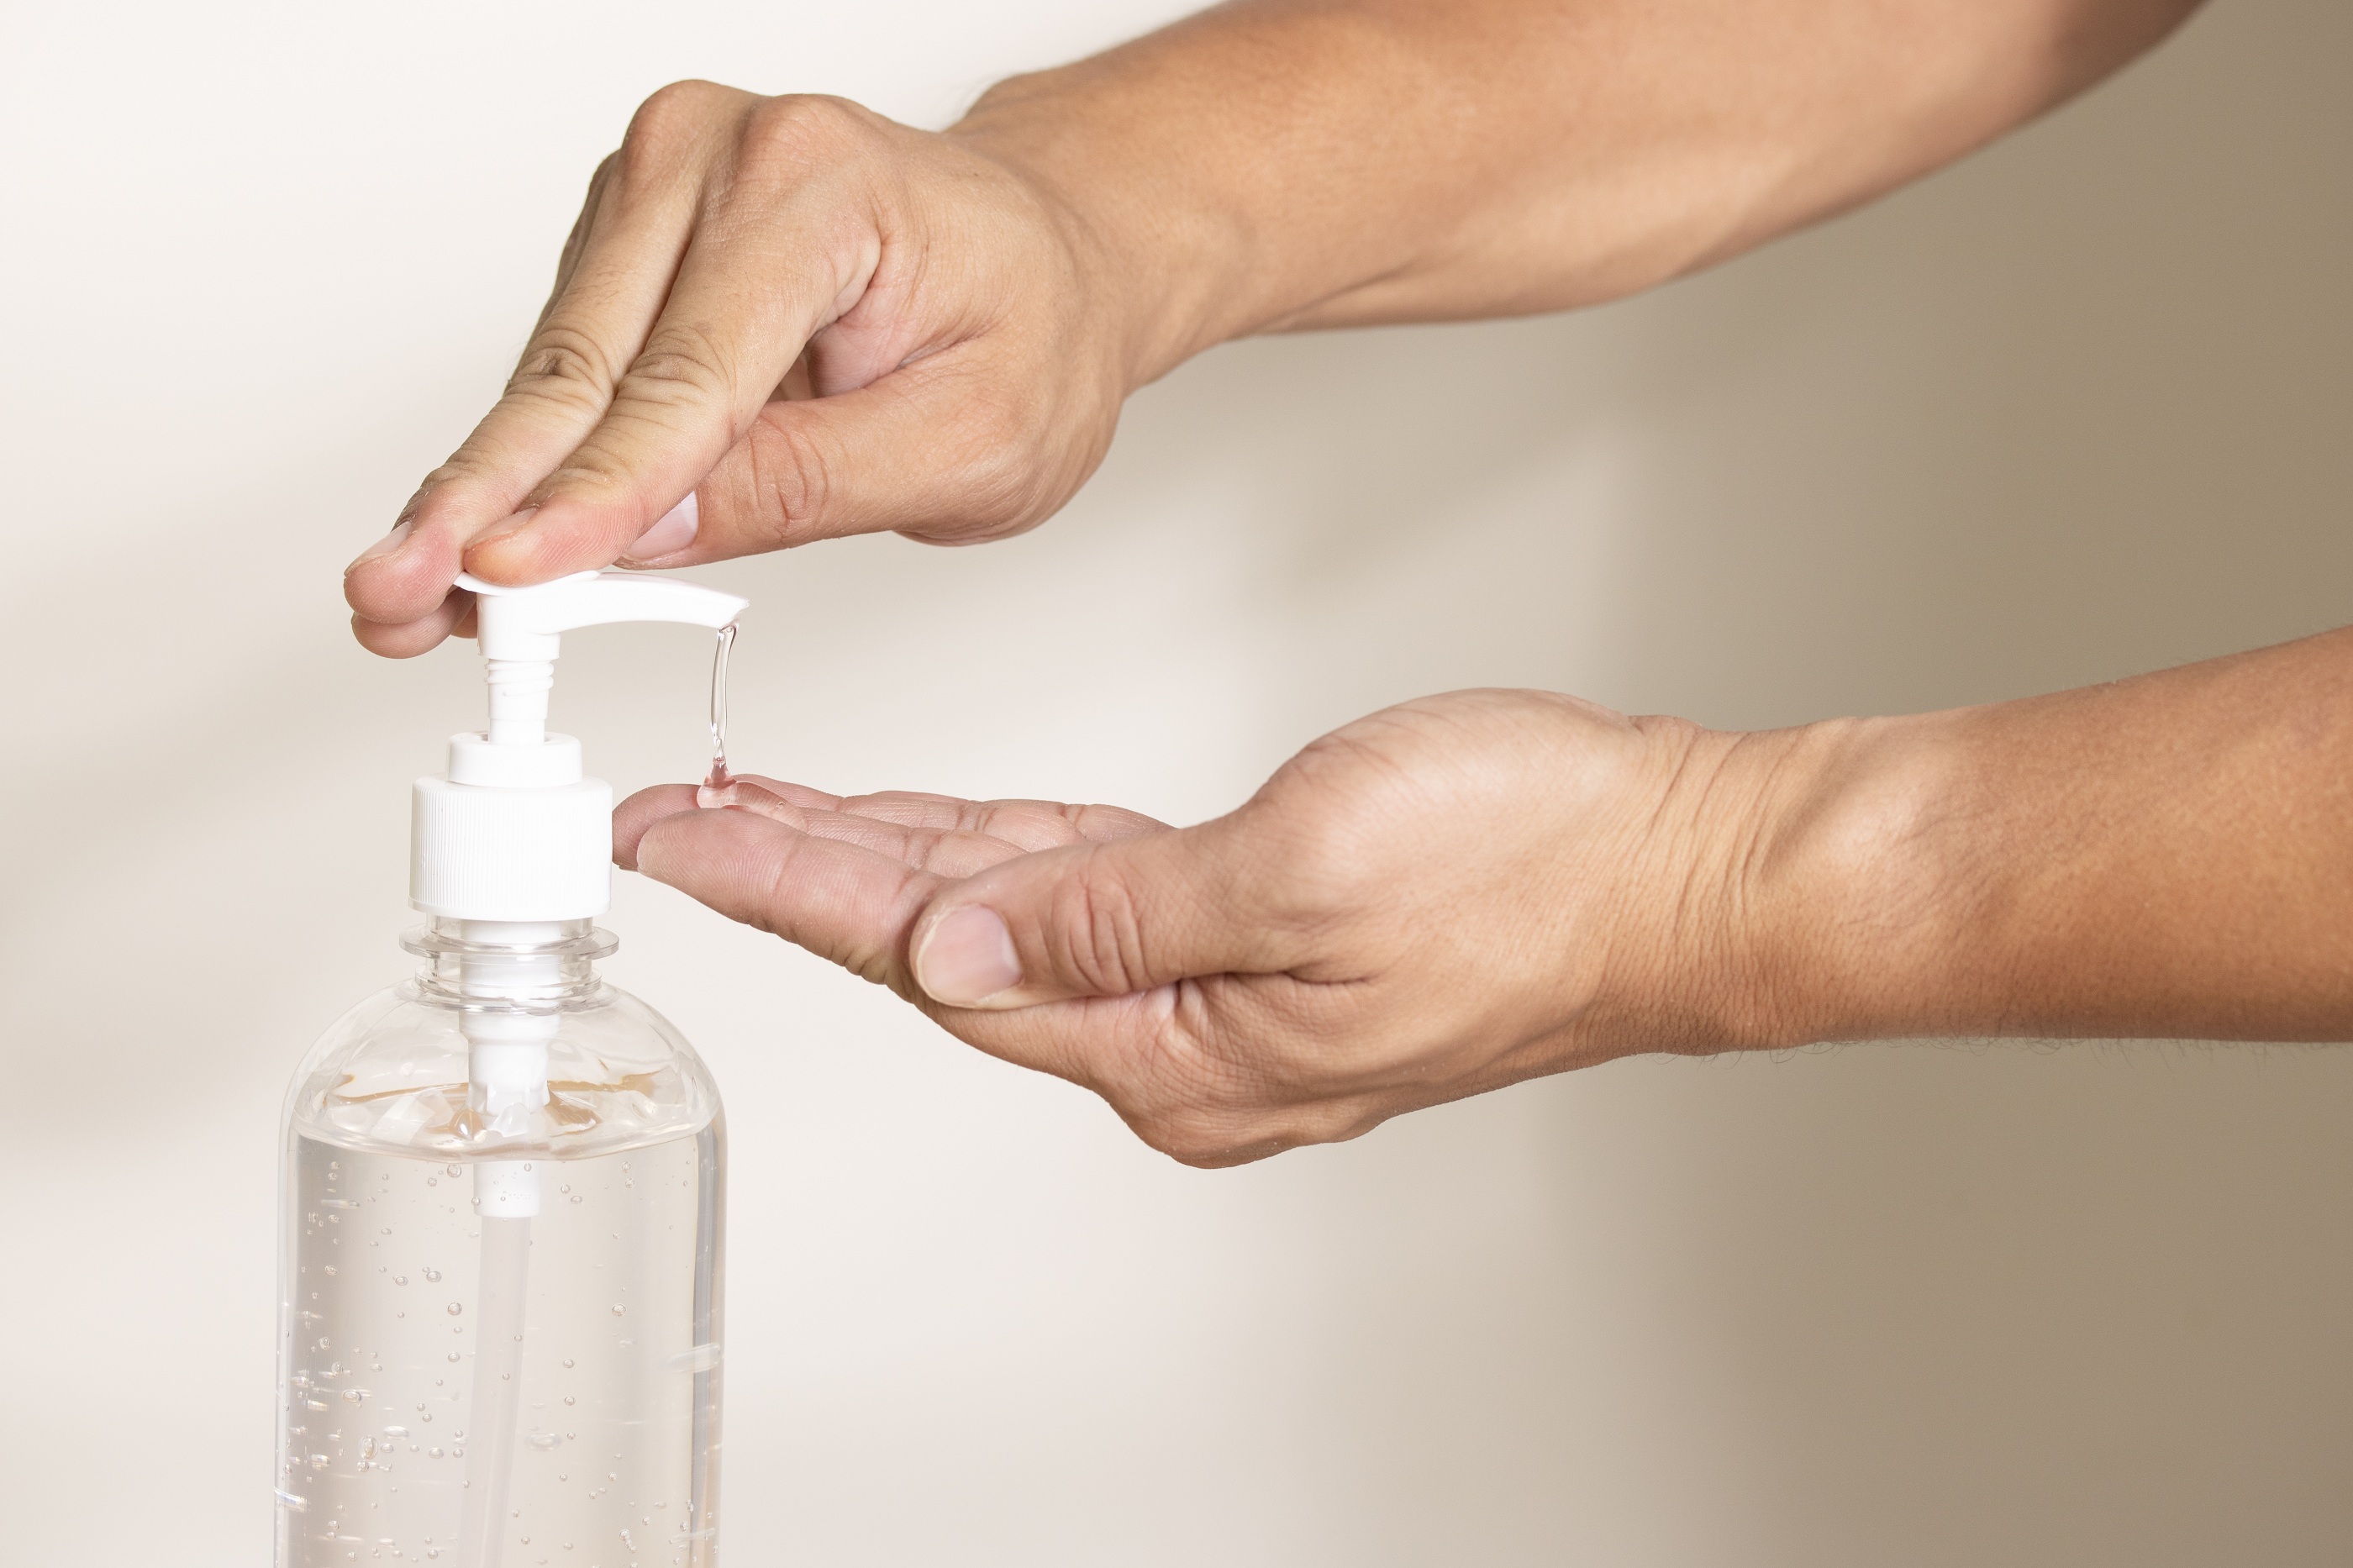  A person uses a hand sanitizer with 60 percent alcohol to clean their hands.